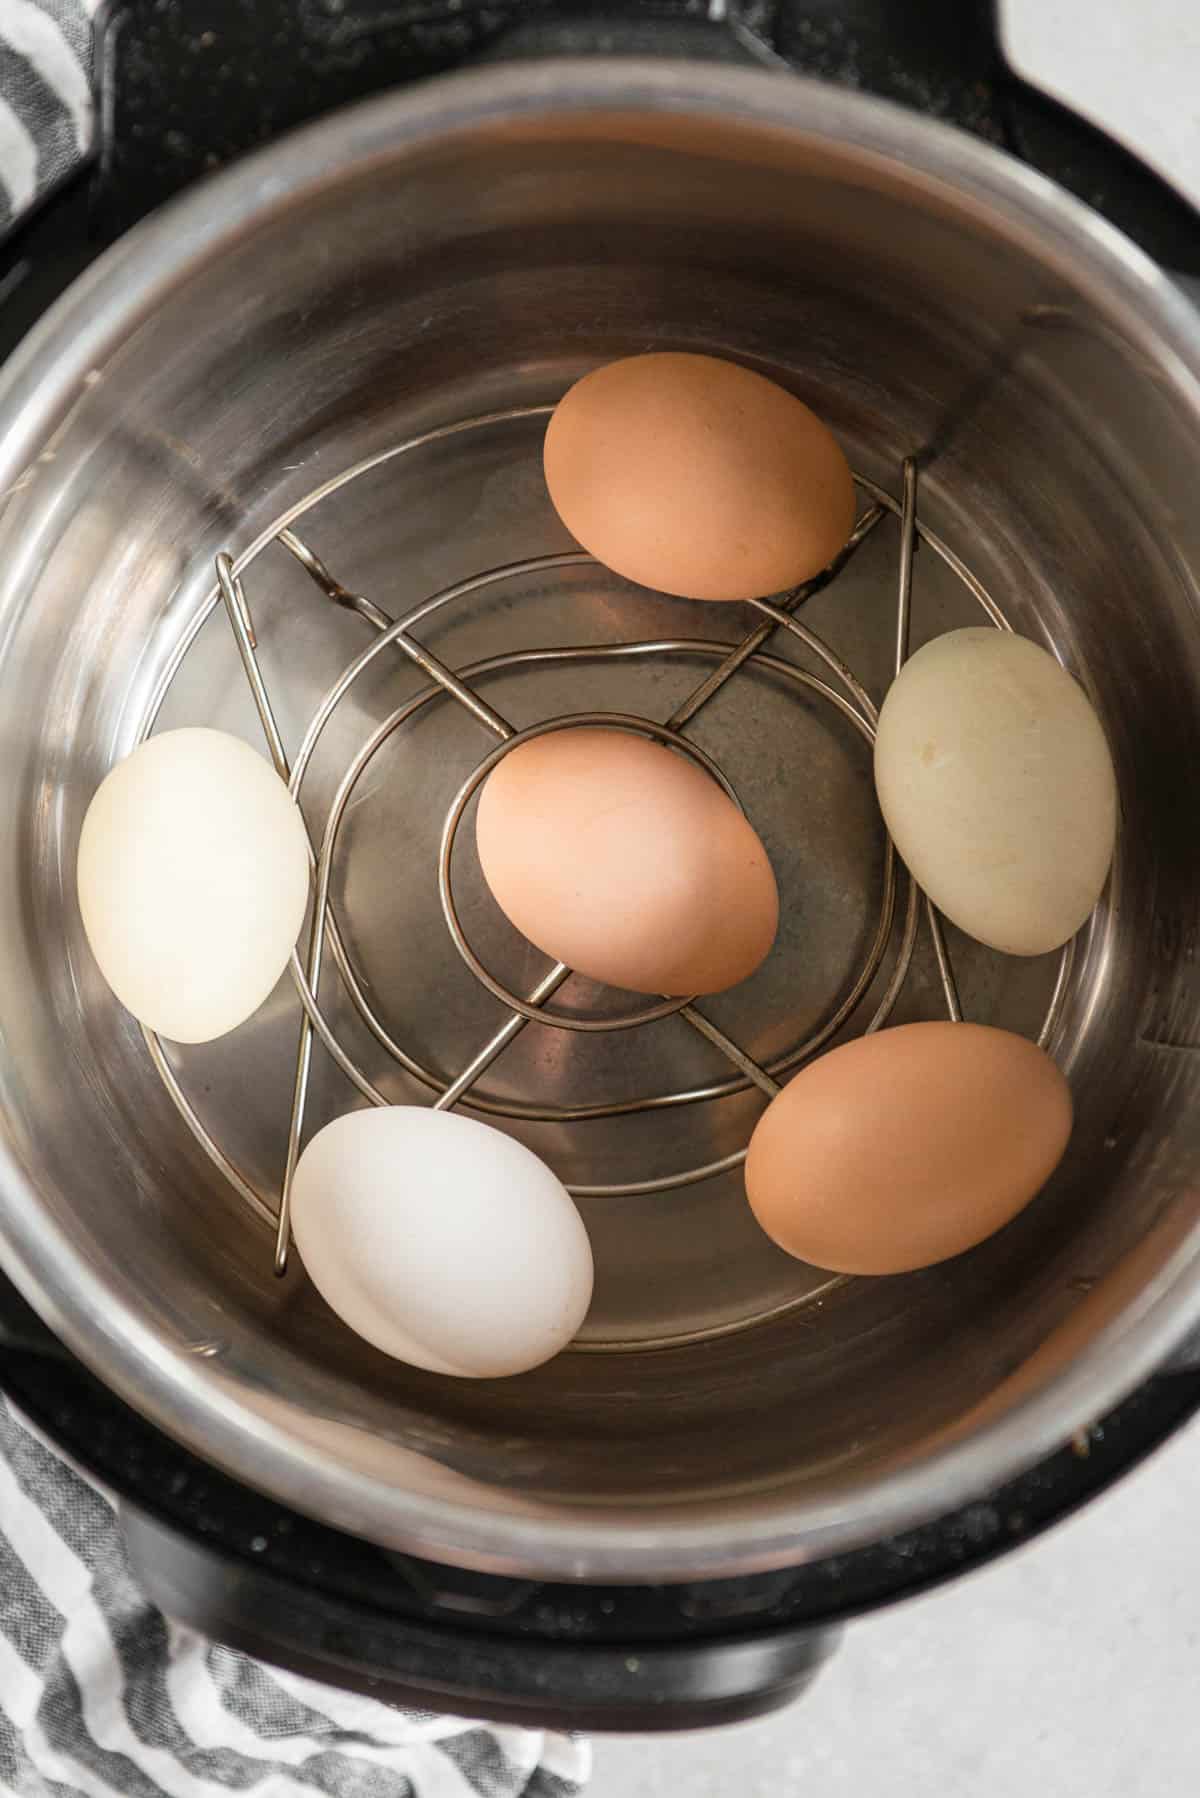 large eggs on rack in Instant Pot.